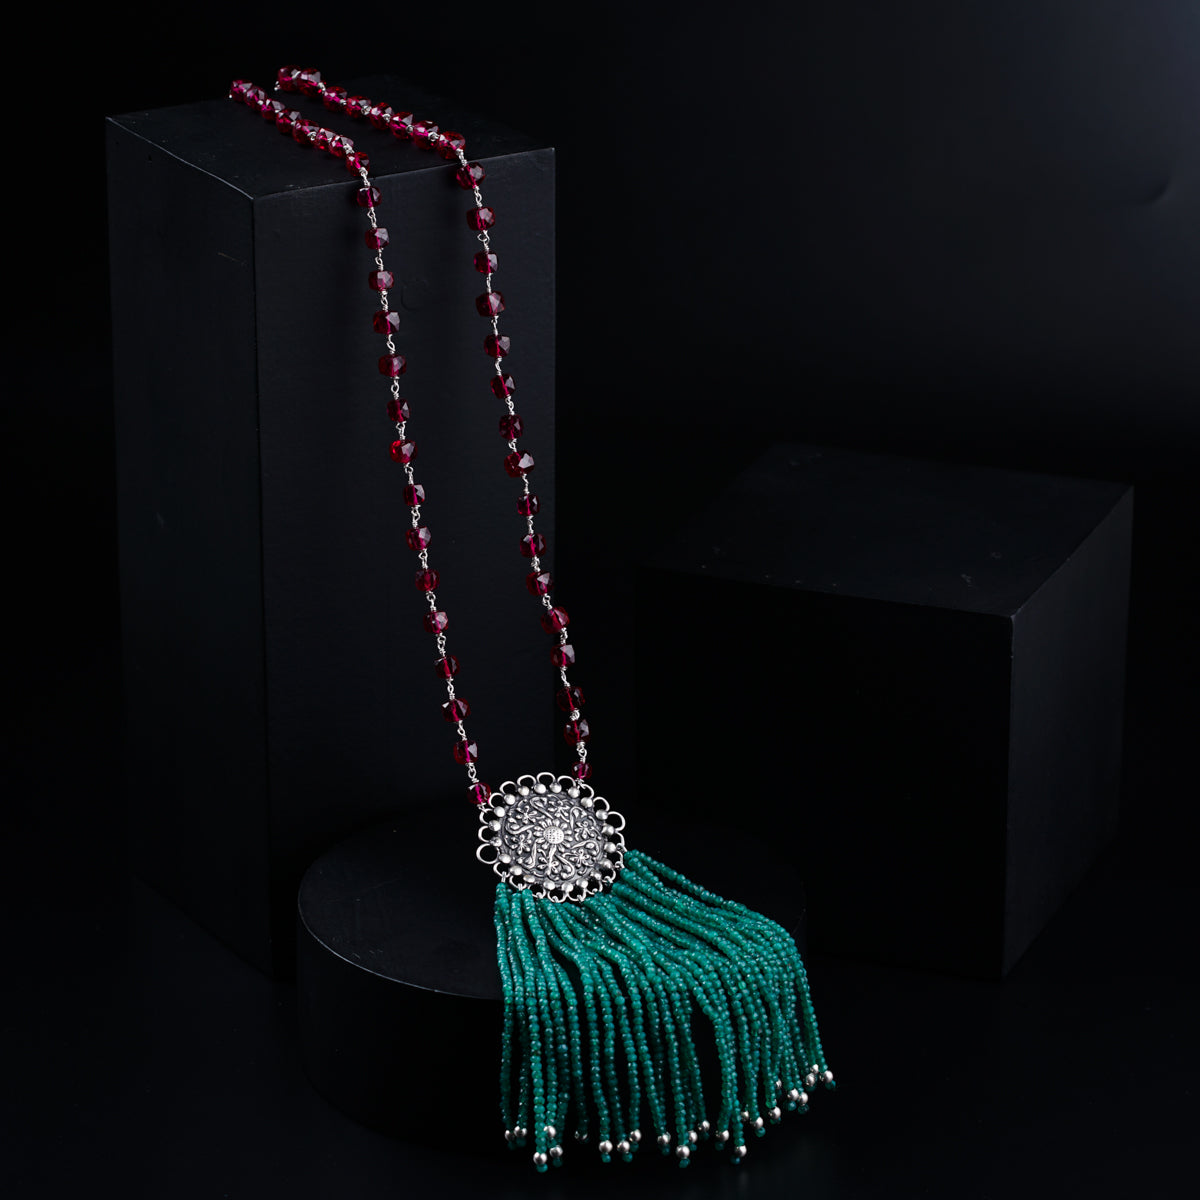 a tasseled necklace with beads and a tassel